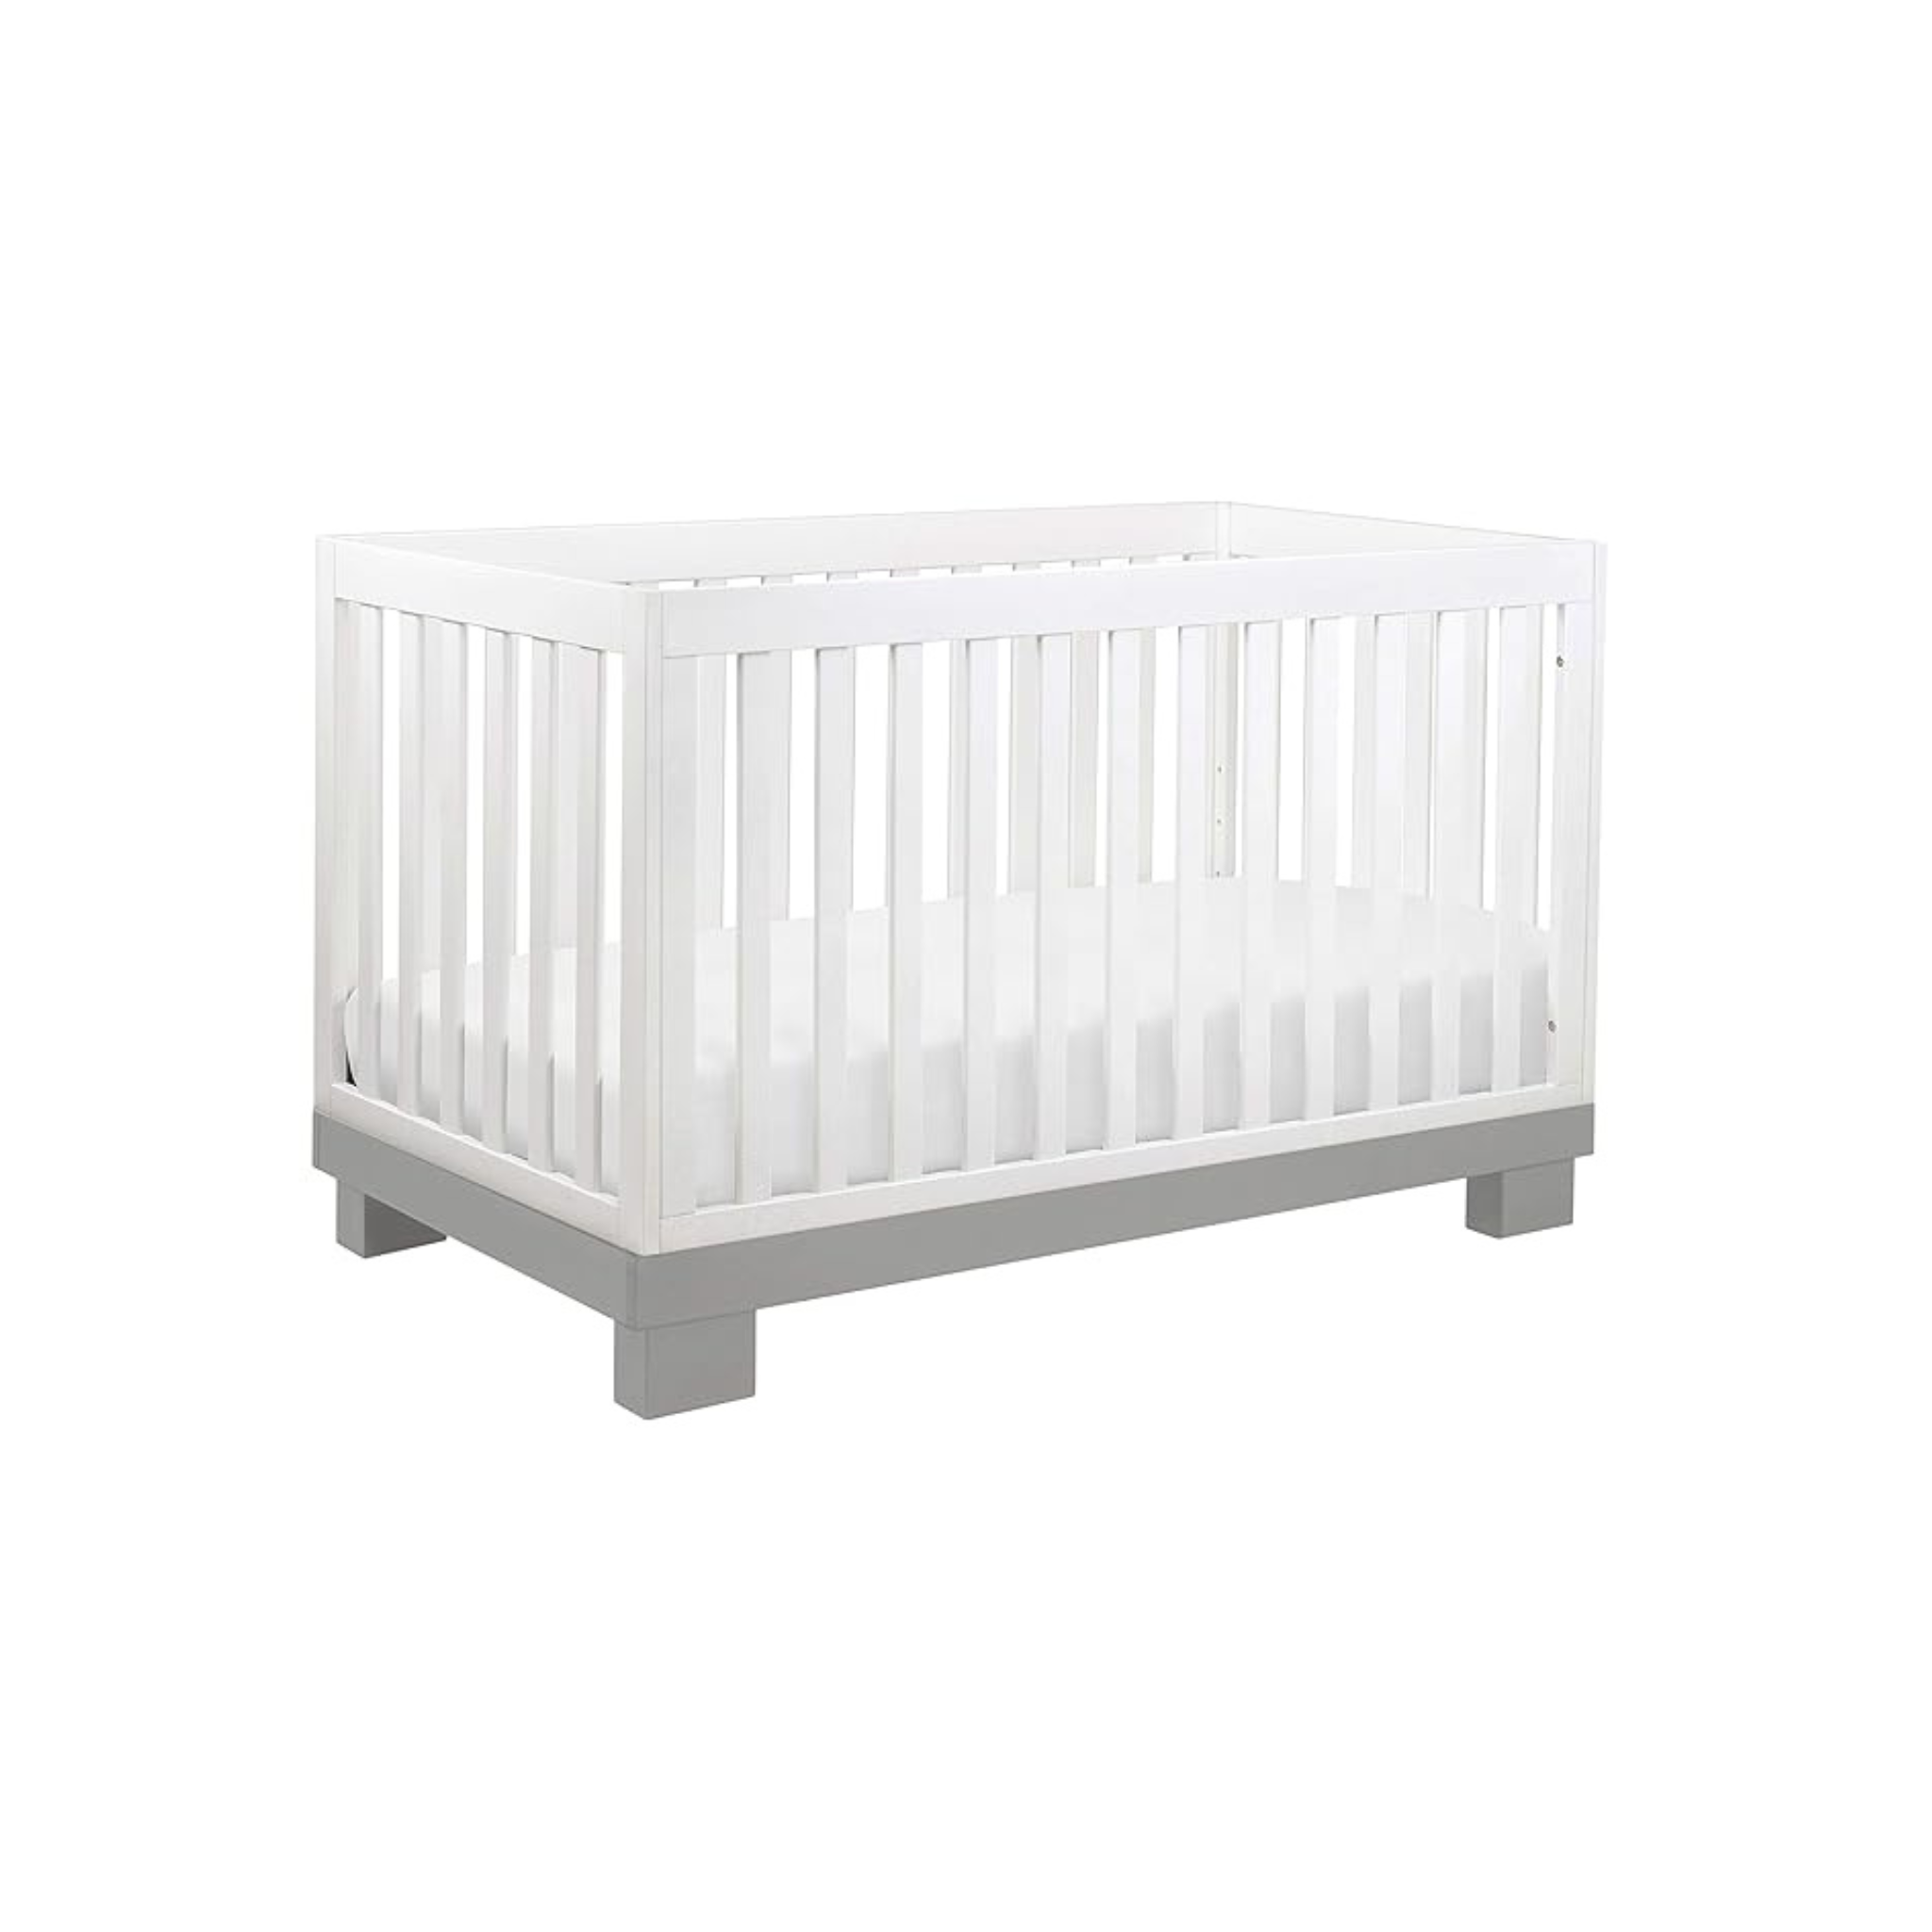 Babyletto Modo 3-in-1 Convertible Crib with Toddler Bed Conversion Kit, Grey and White